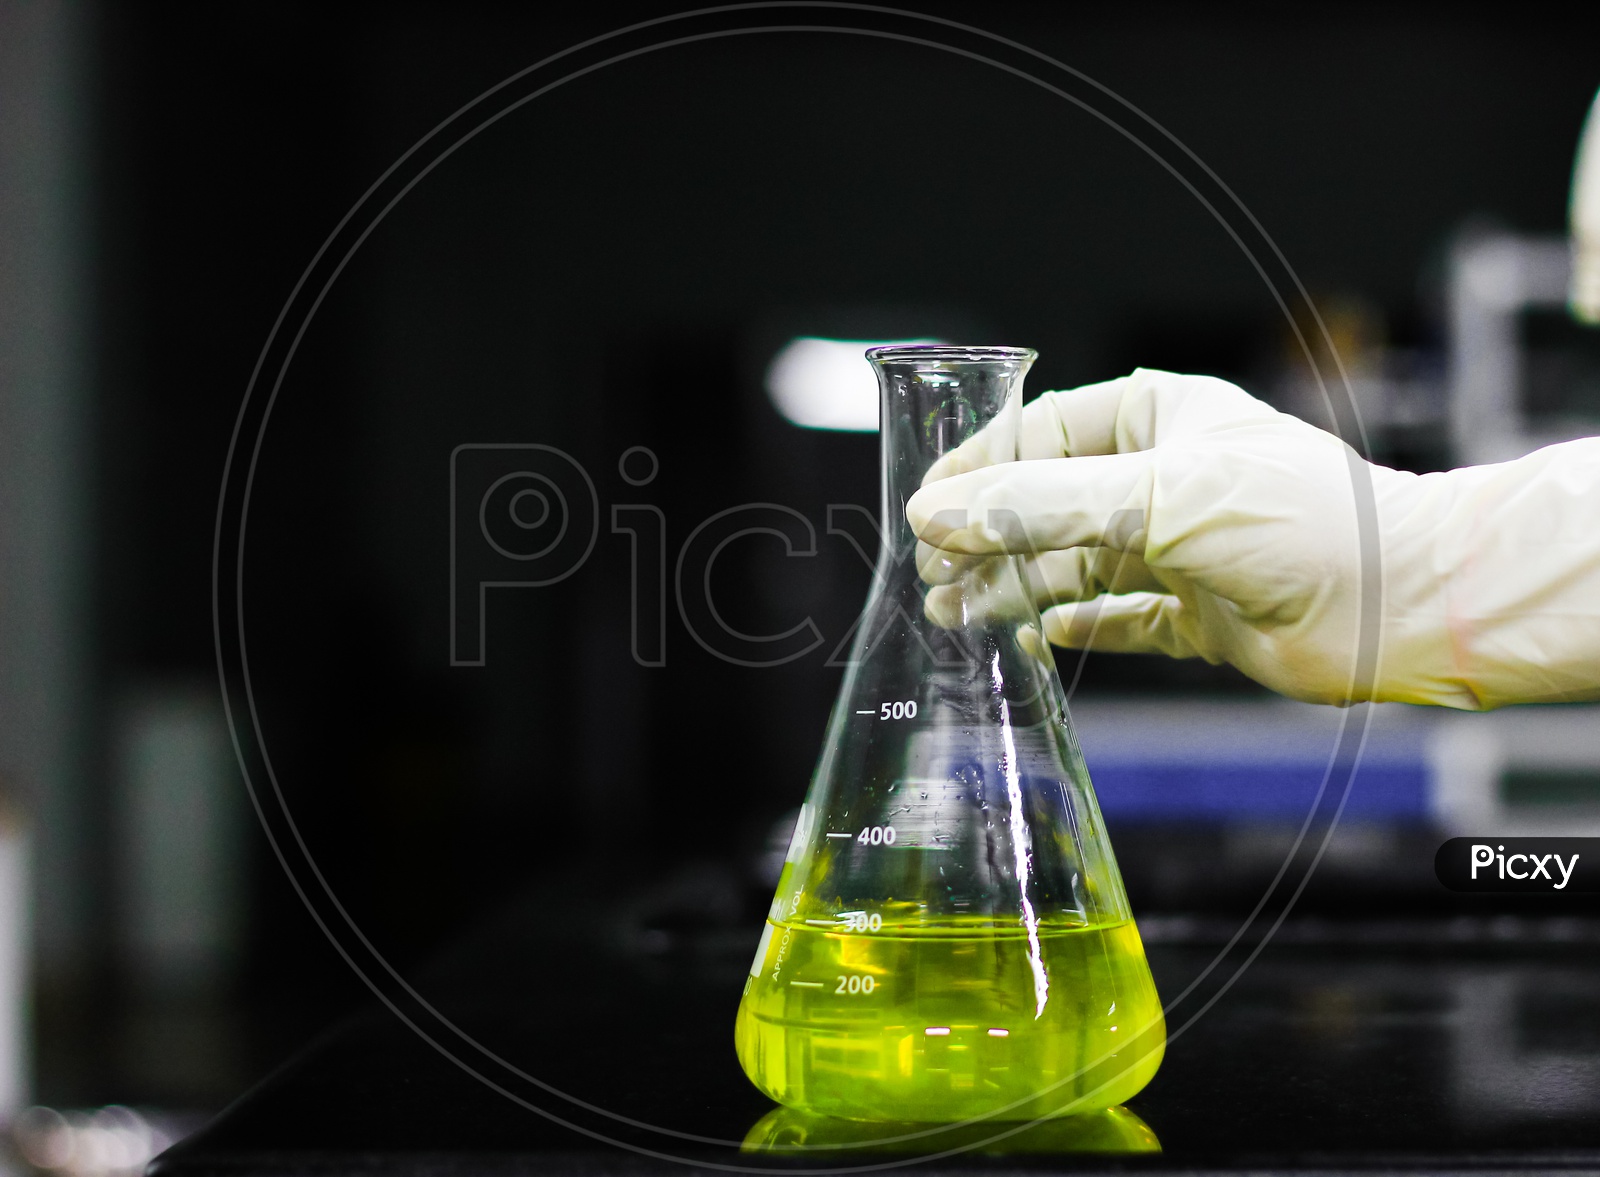 Scientist Holding A Glass Conical Flask In A Gloved Hand In Chemistry Laboratory